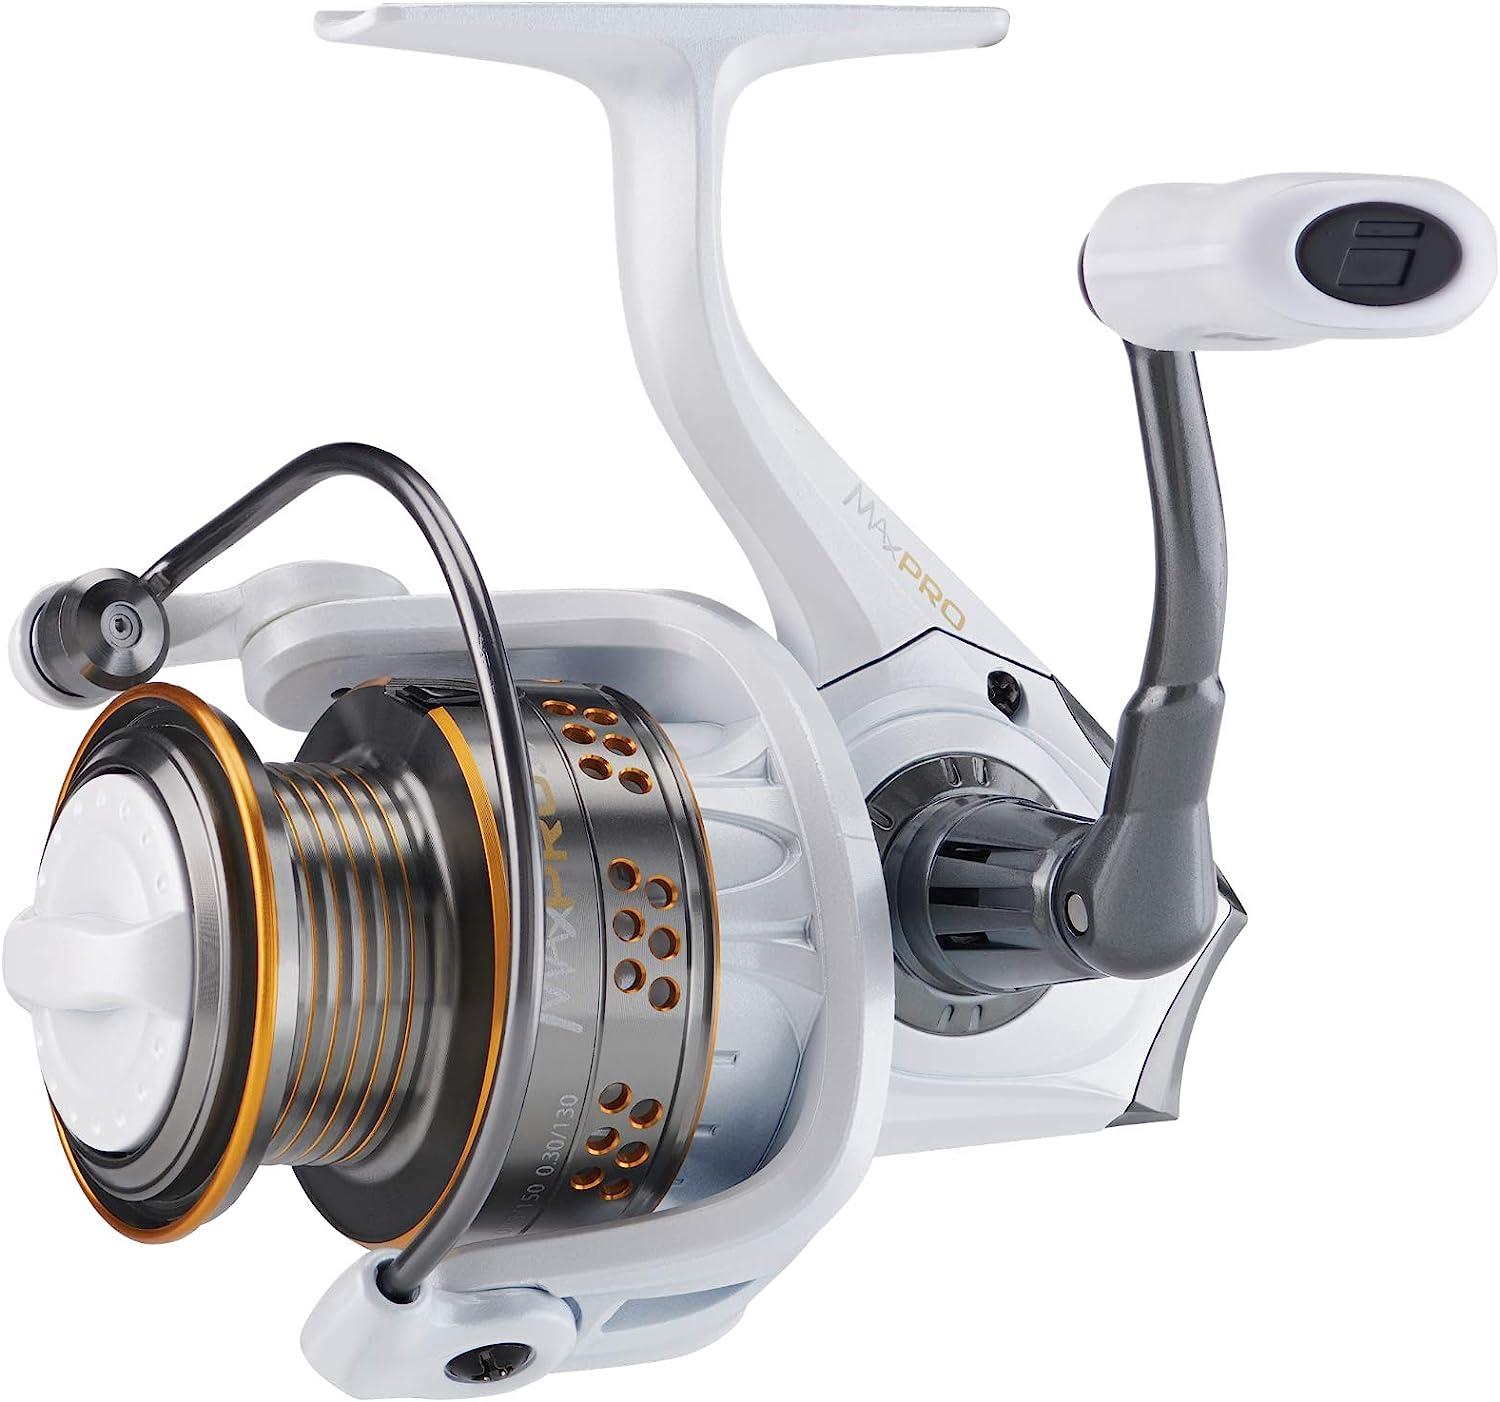 Abu Garcia Max Pro Spinning Reel, Size 60, Right/Left Handle Position,  Graphite Body, Corrosion-Resistant, Machined Aluminum Spool, Front Drag  System Max Pro (New Model) 10 - Box